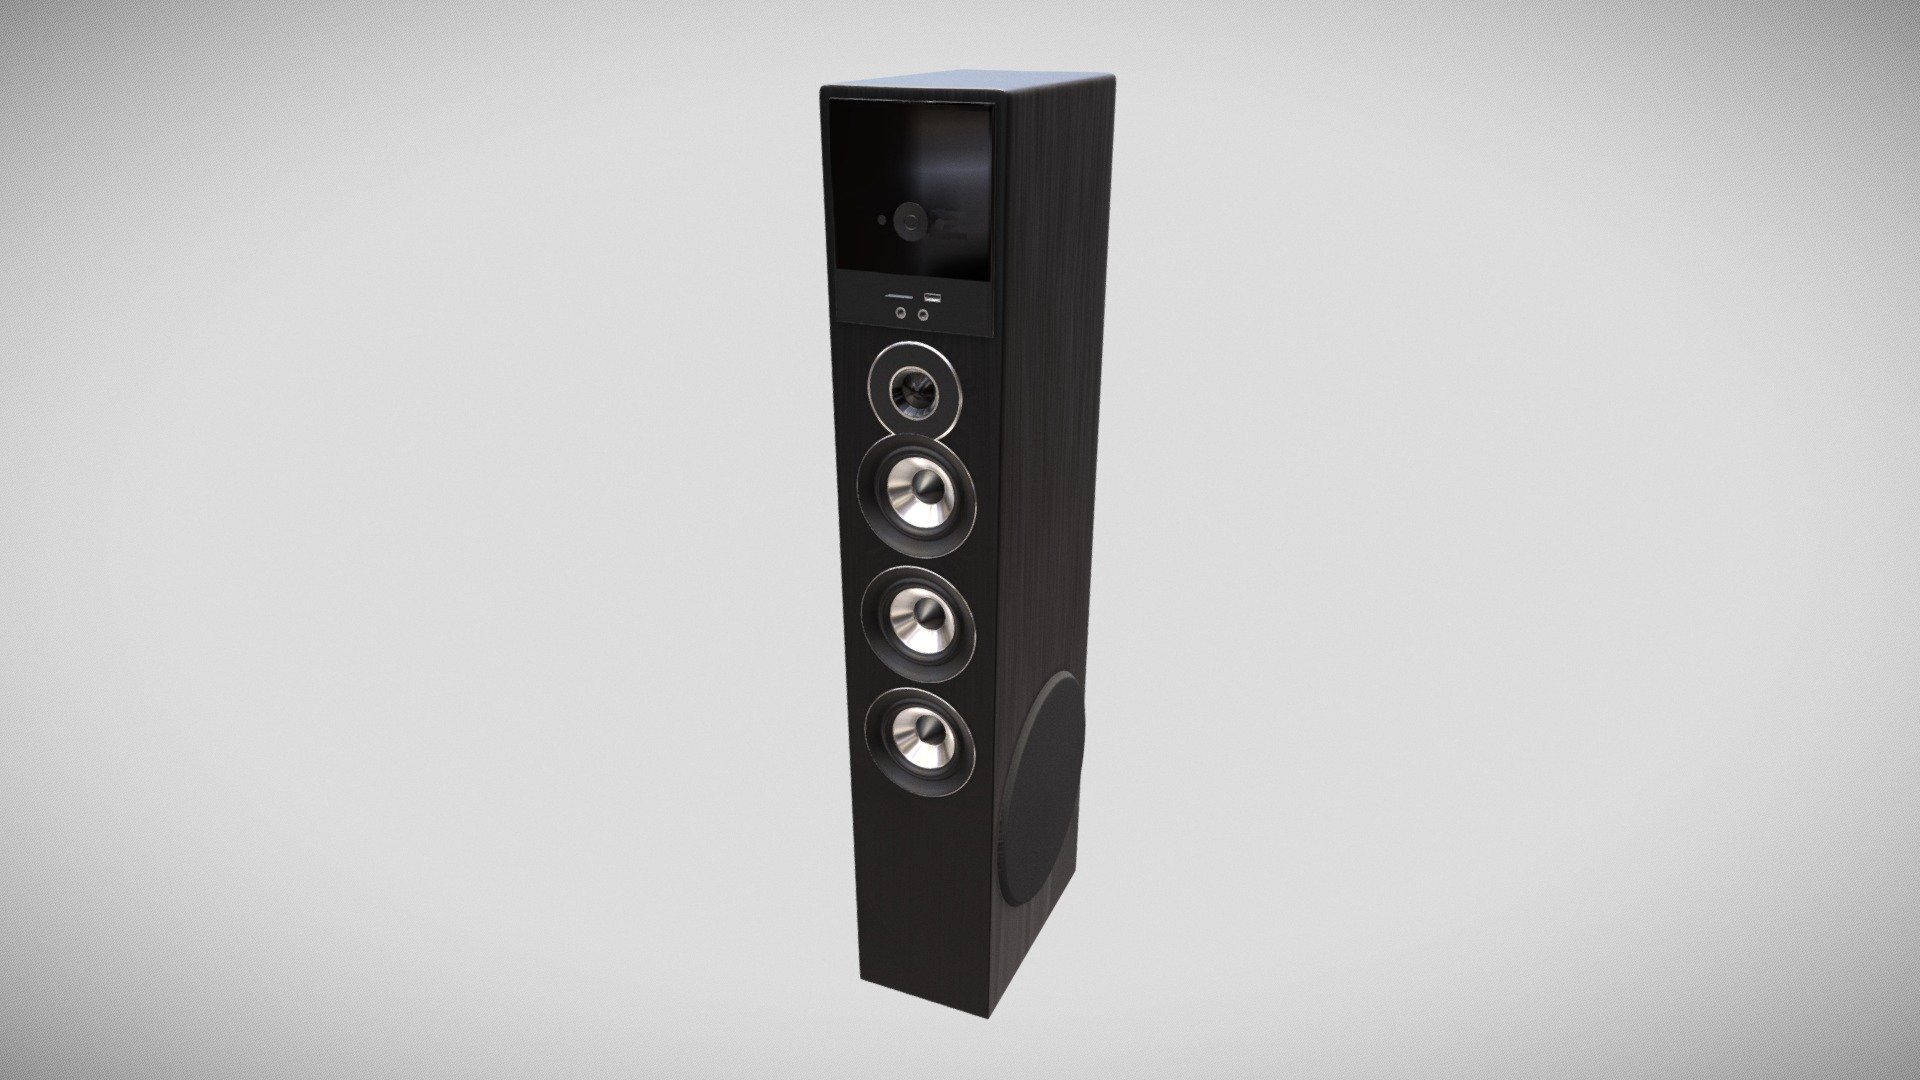 Speaker tower has been modeled using Blender.
All textures were done in Substance Painter 3d model